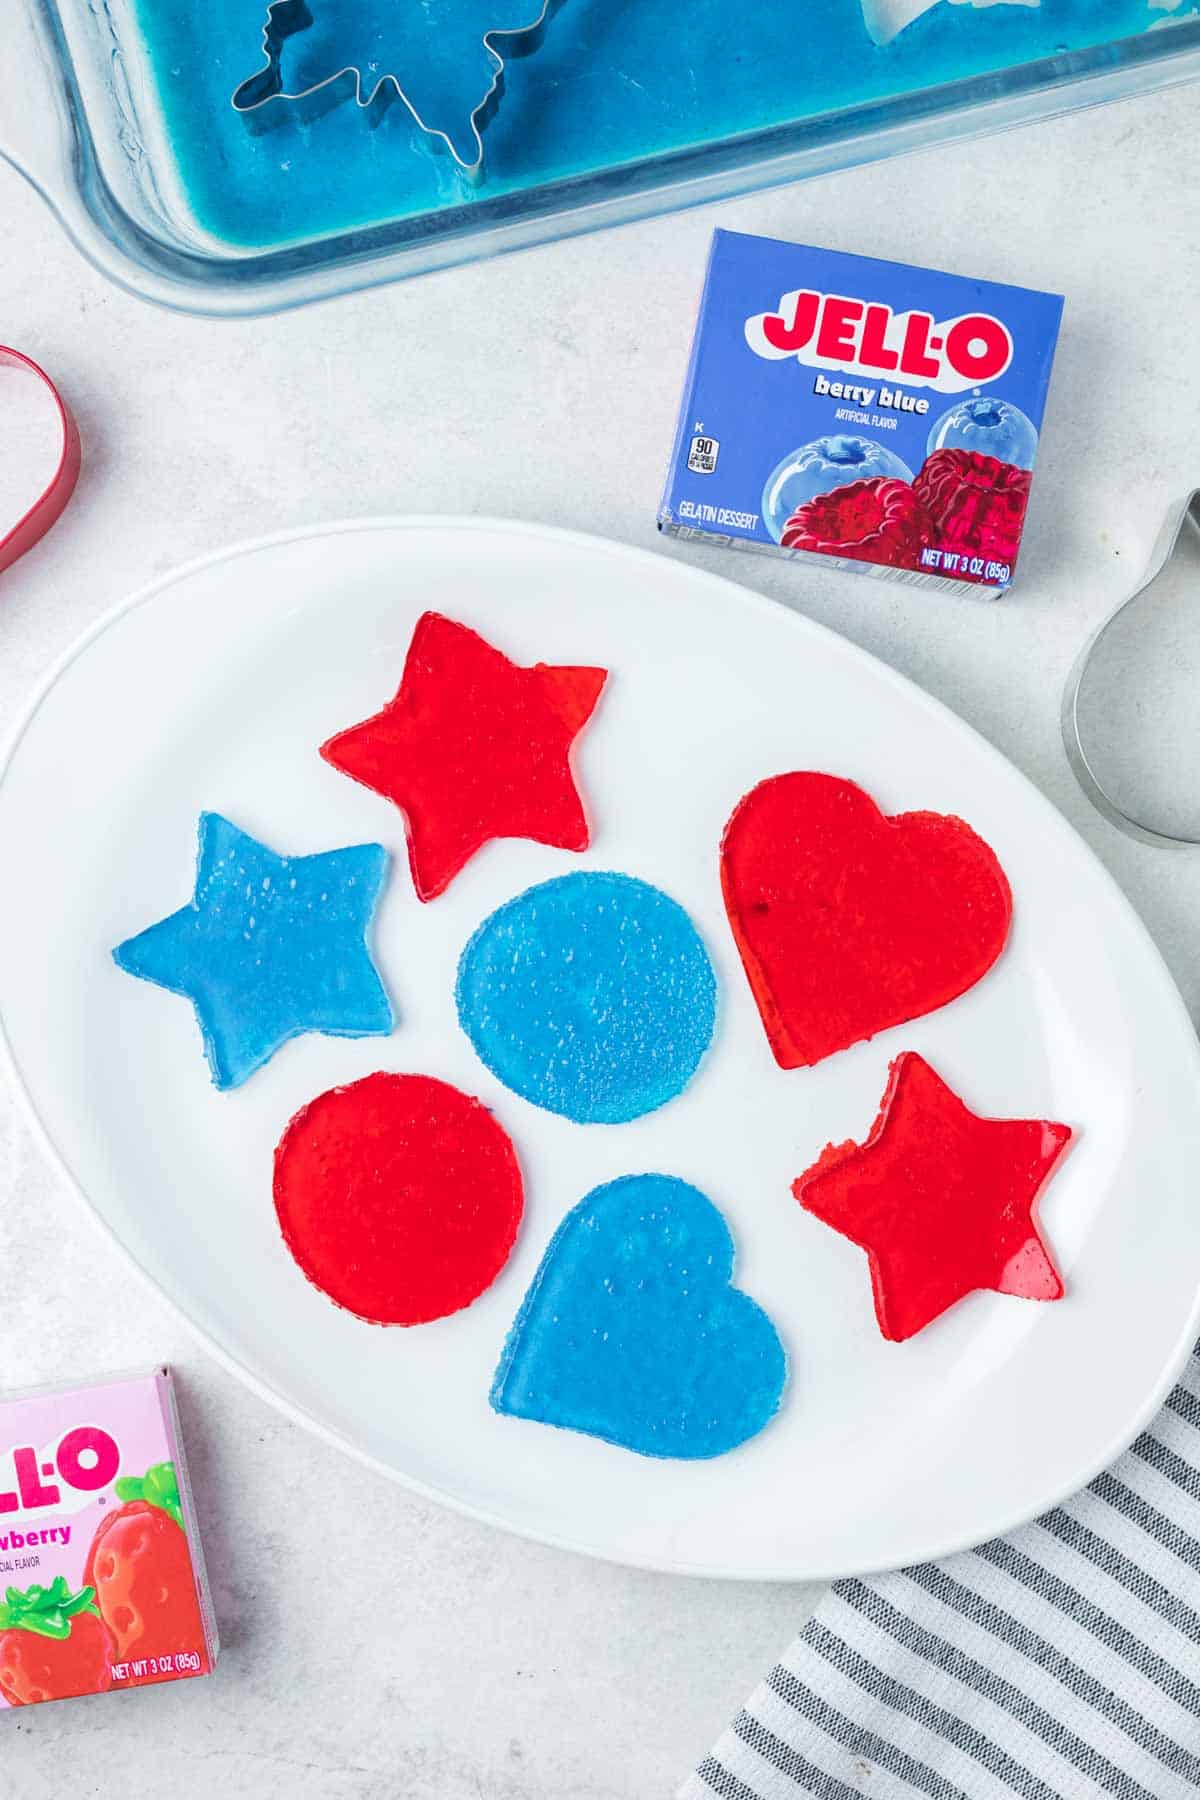 Jello jigglers in assorted flavors and shapes on a plate.